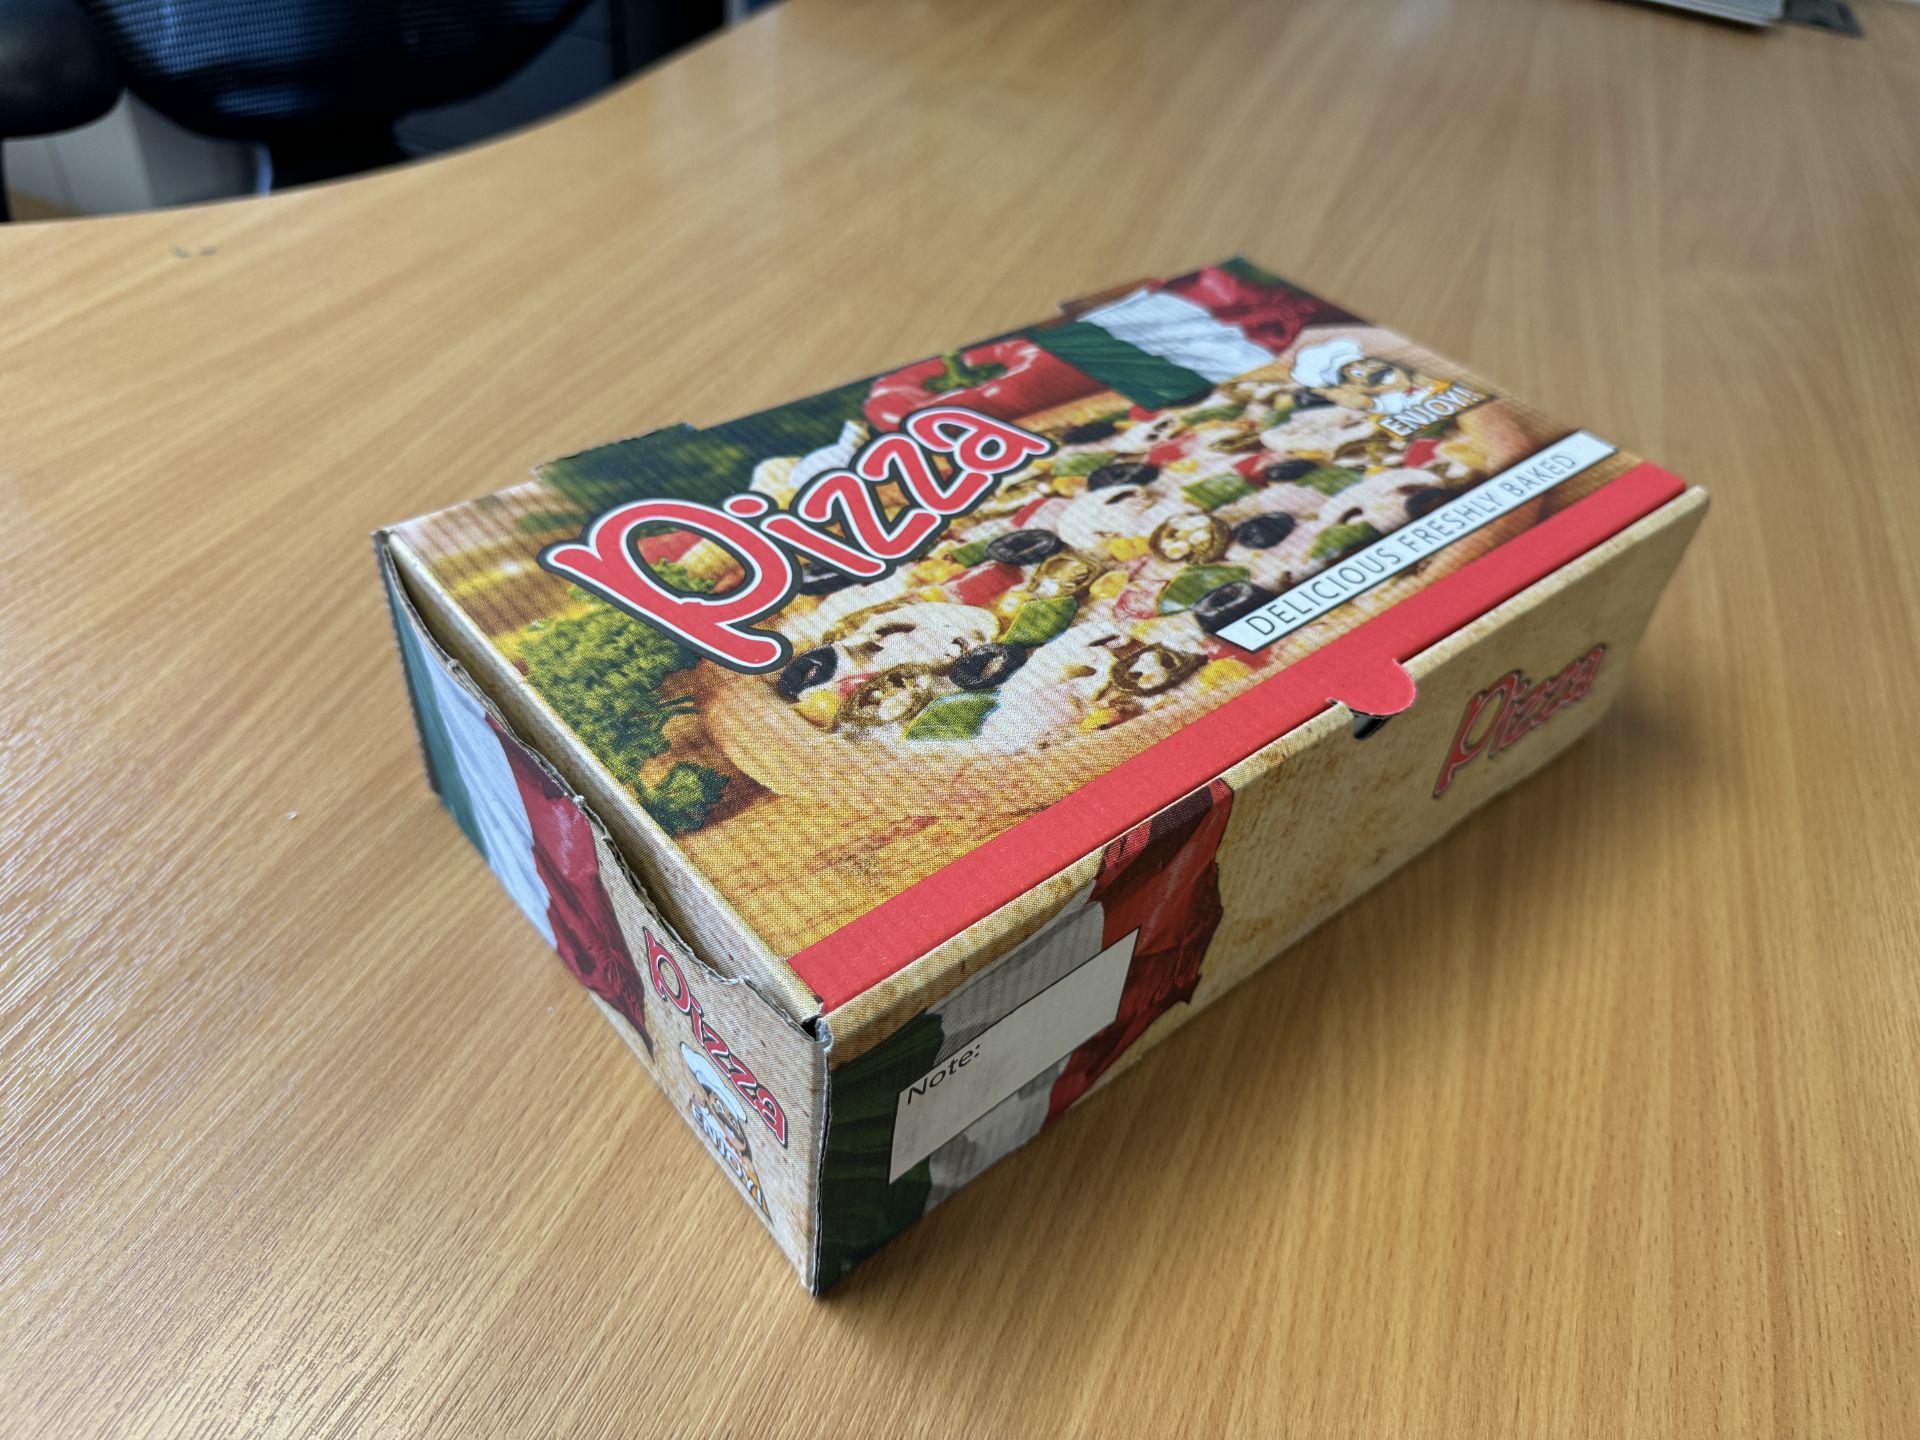 Circa 900 - Enjoy Calzone Boxes (Cardboard) - Multiple Uses RRP £130 - Image 8 of 12